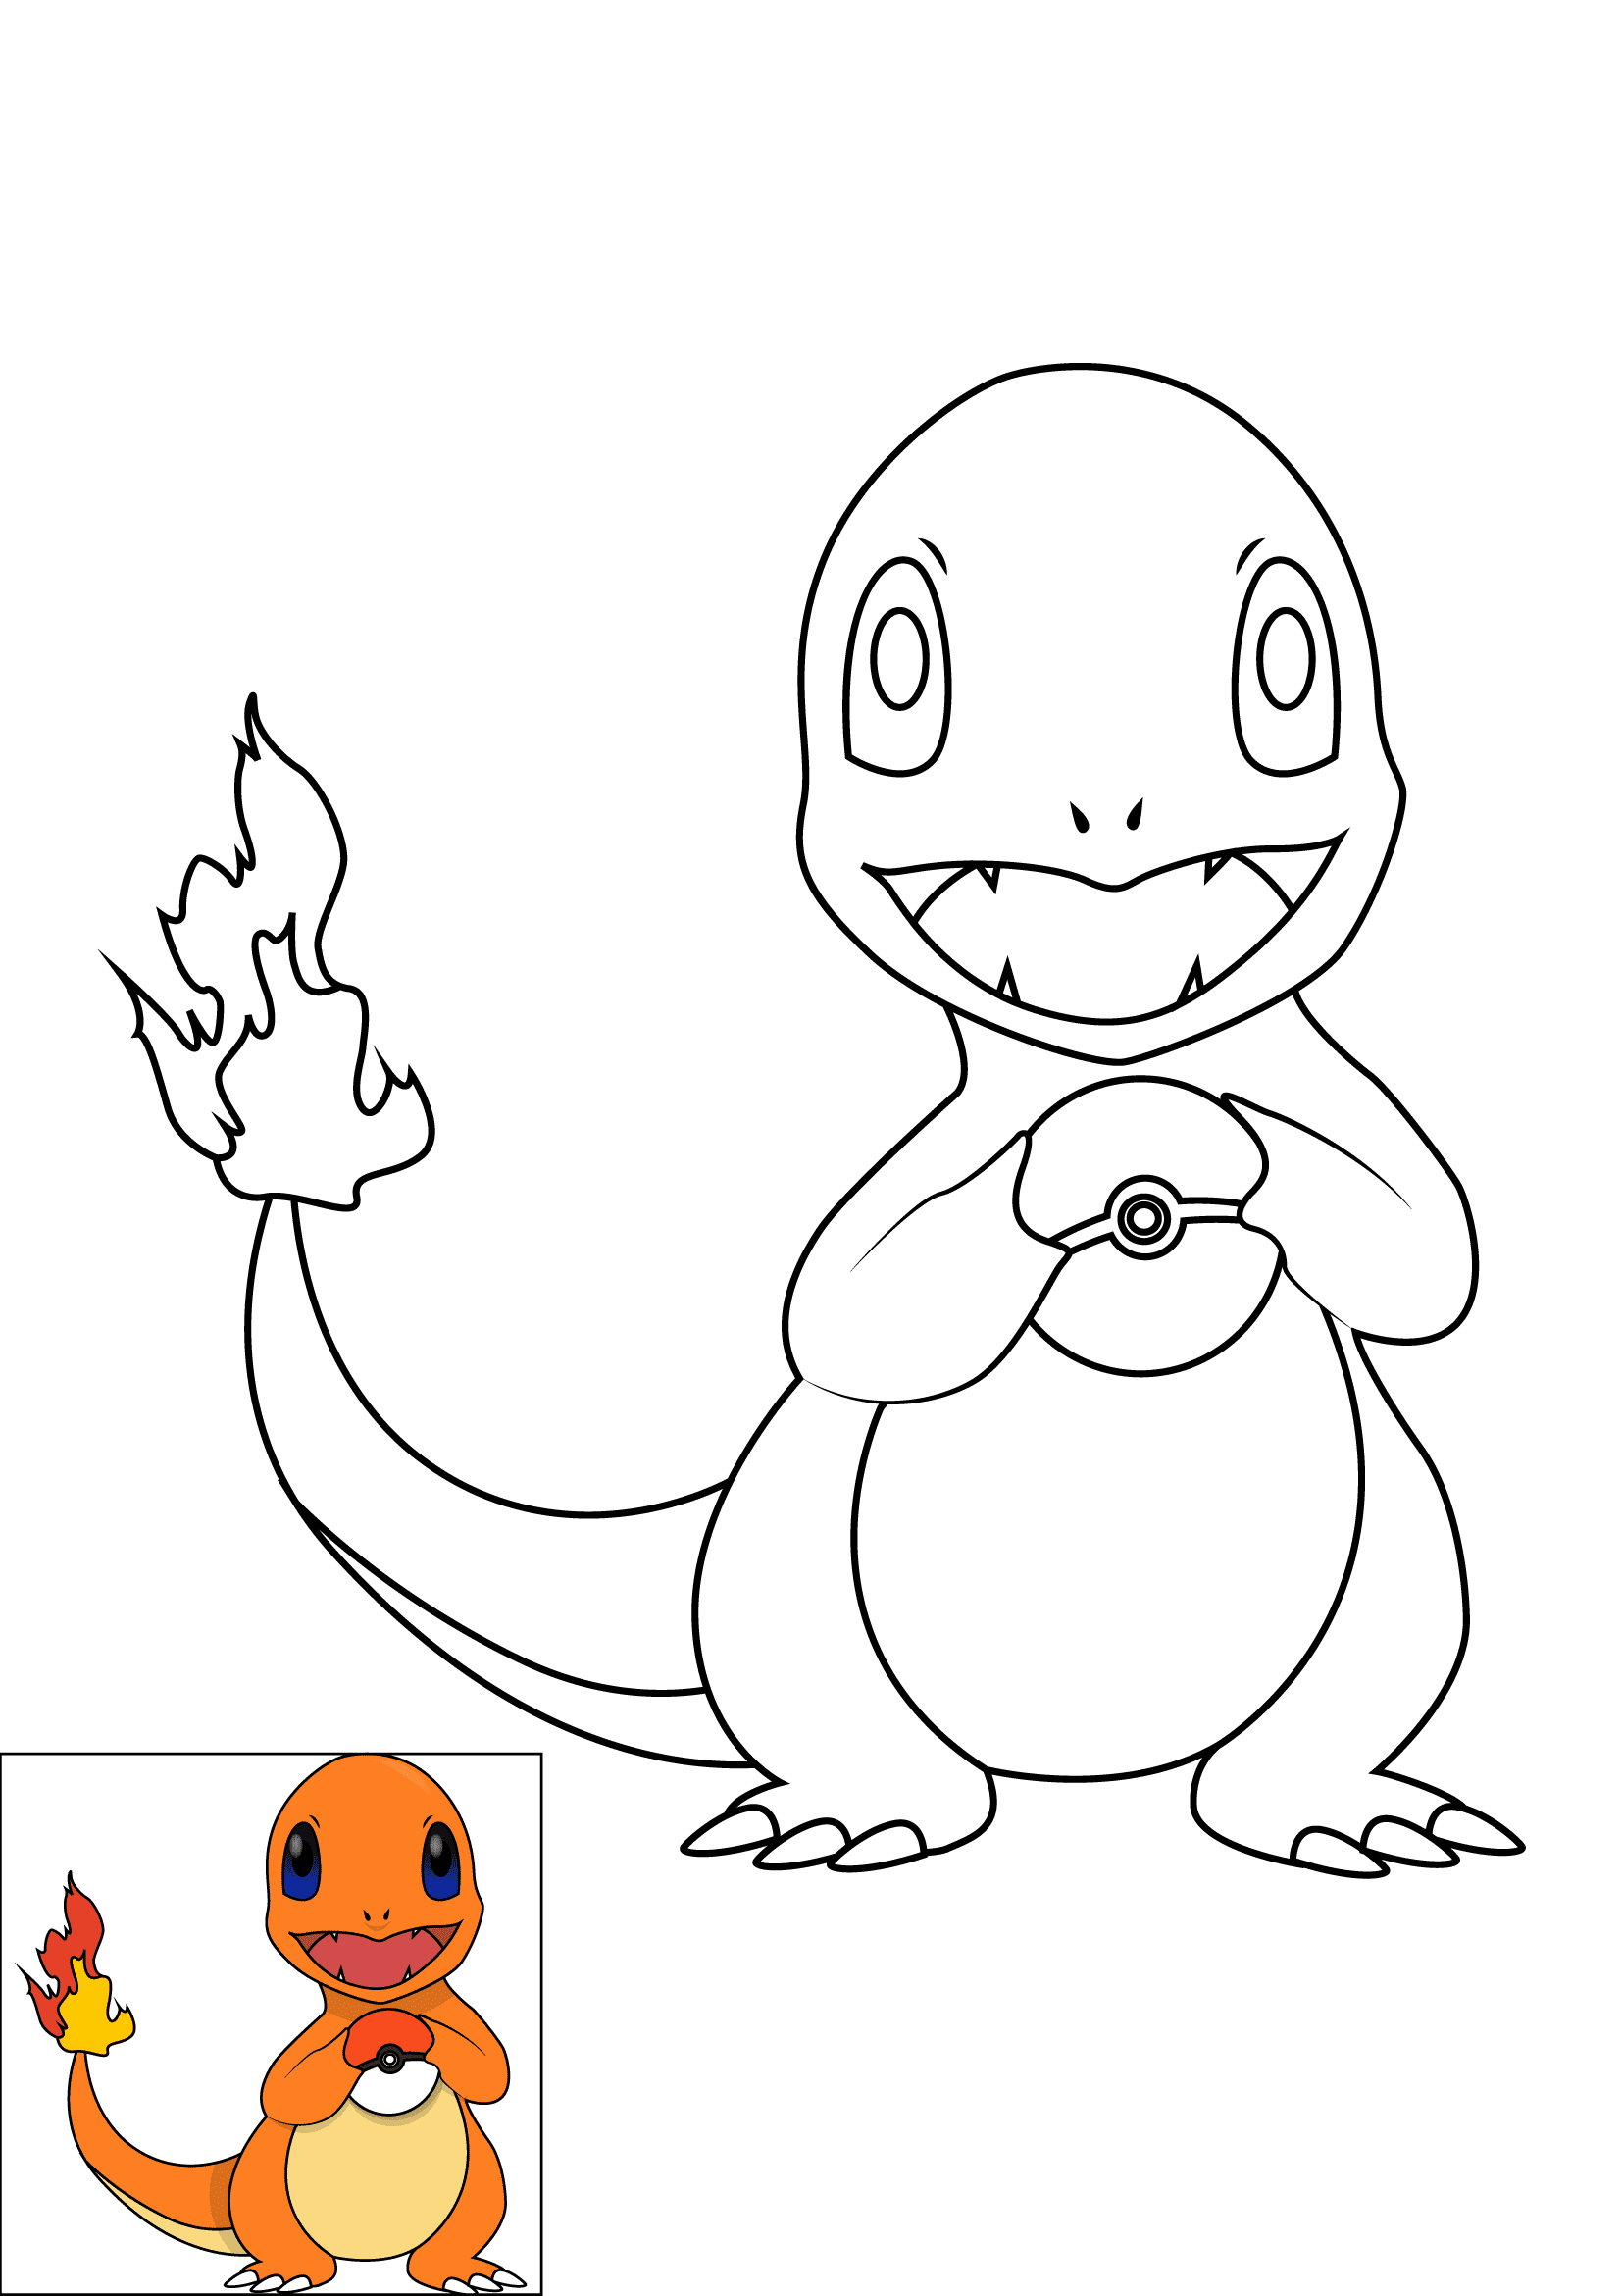 How to Draw Charmander Step by Step Printable Color